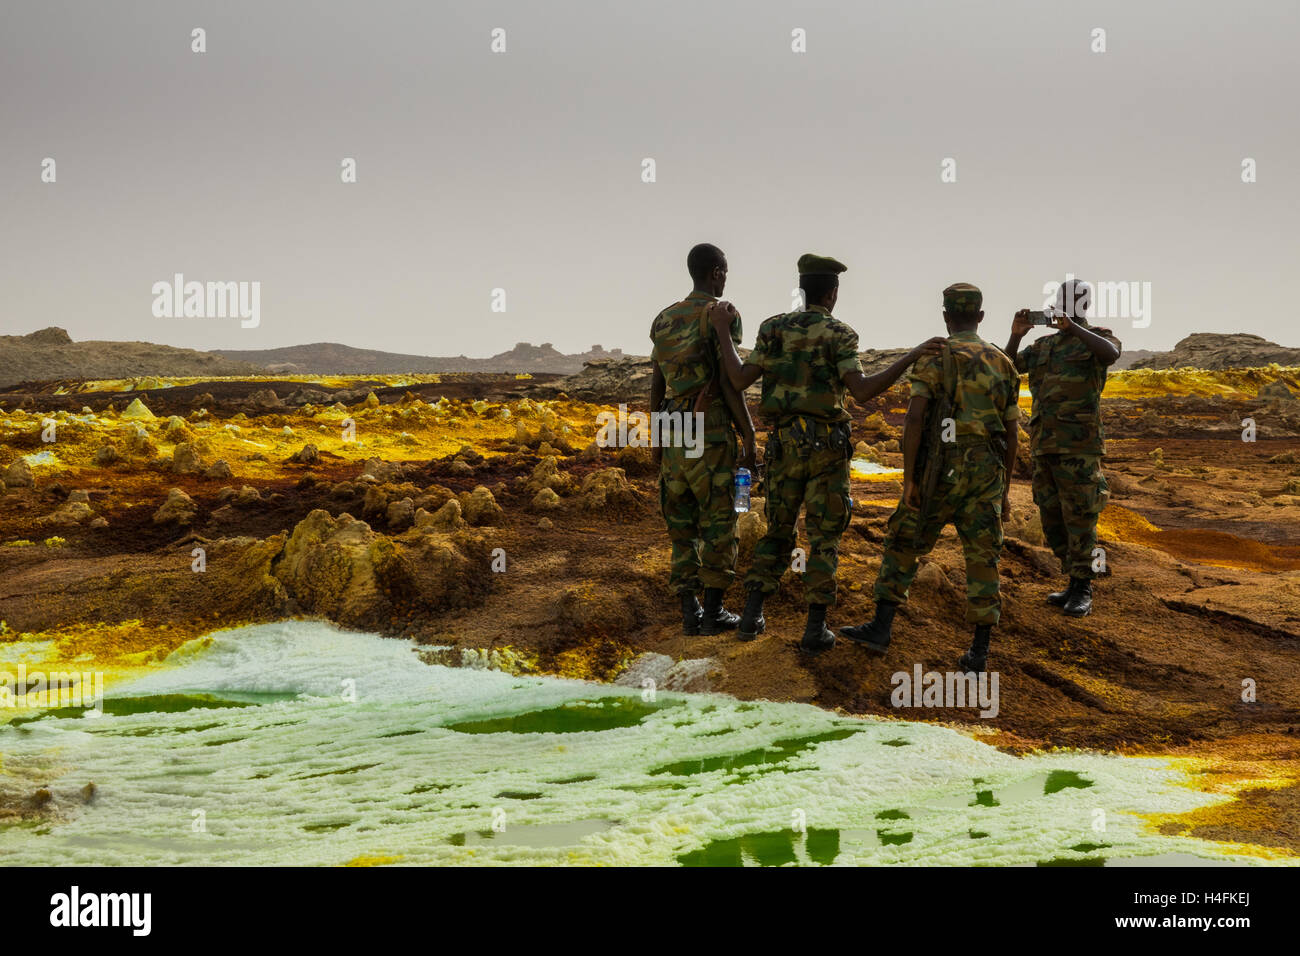 a group of Ethiopian Army soldiers pose for a photo at Dallol, a patch of vibrant chemical salts in the Danakil desert, Ethiopia Stock Photo